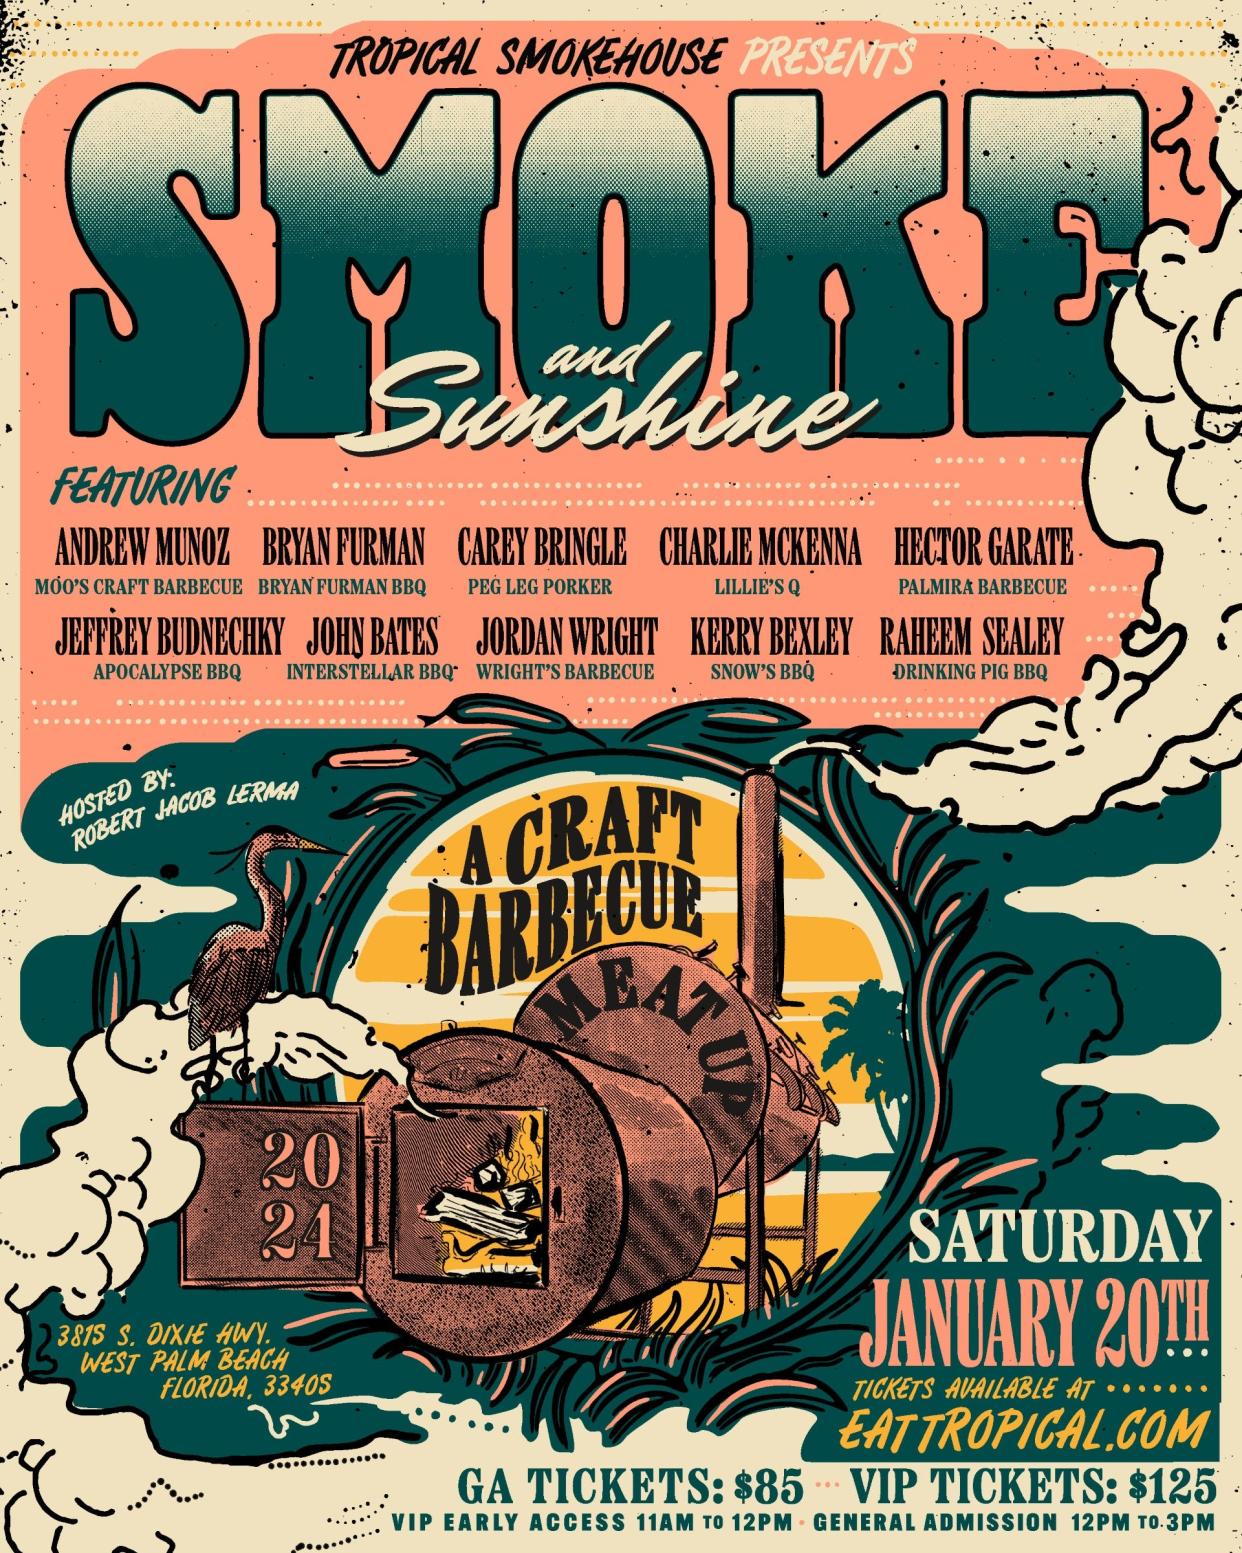 The Smoke and Sunshine: A Craft Barbecue Meat Up event will be held Saturday, Jan. 20 at Tropical Smokehouse in West Palm Beach. It will feature some of the best pitmasters from across the country.